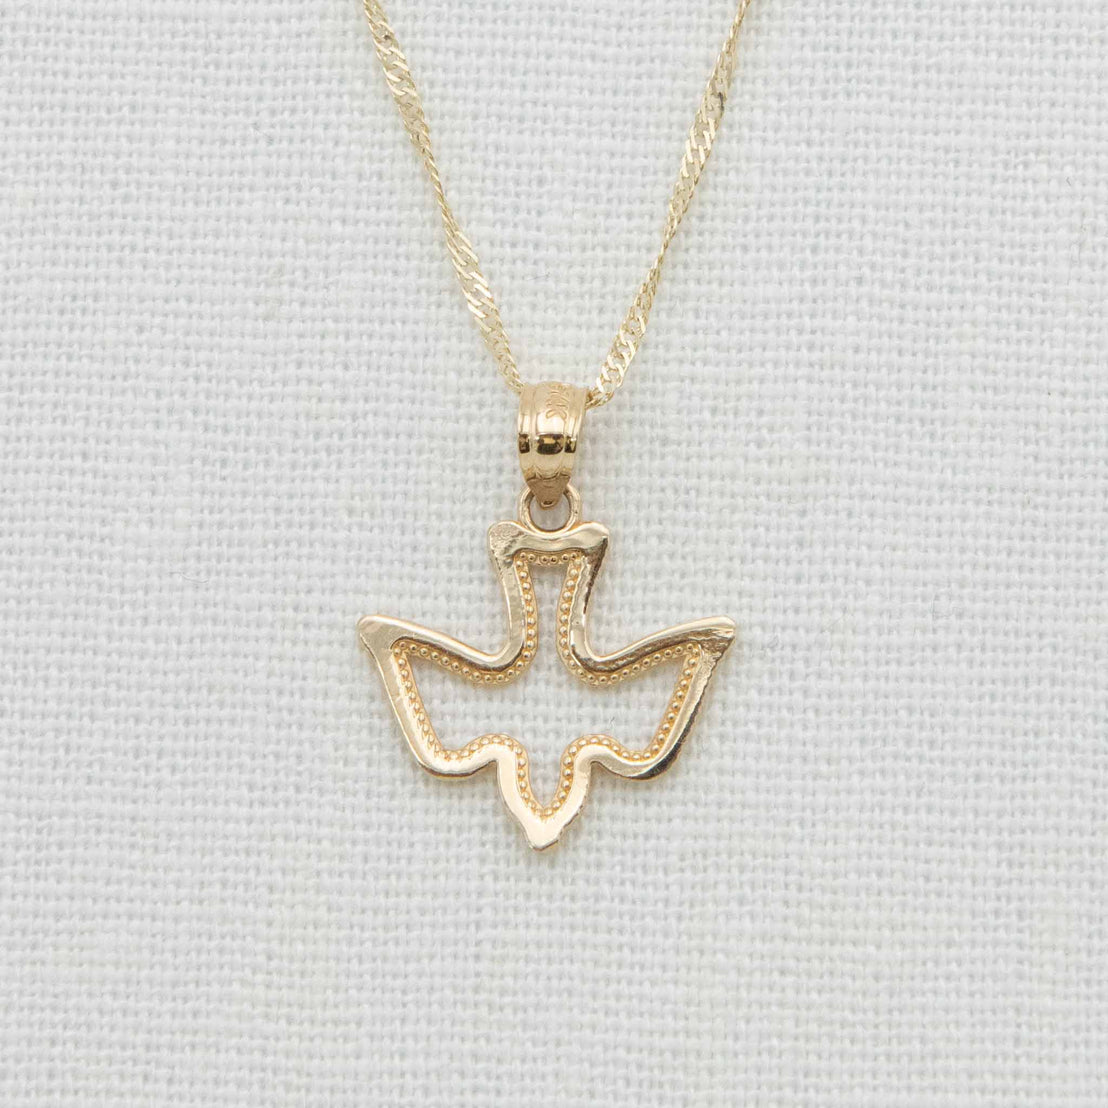 Gold dove charm necklace